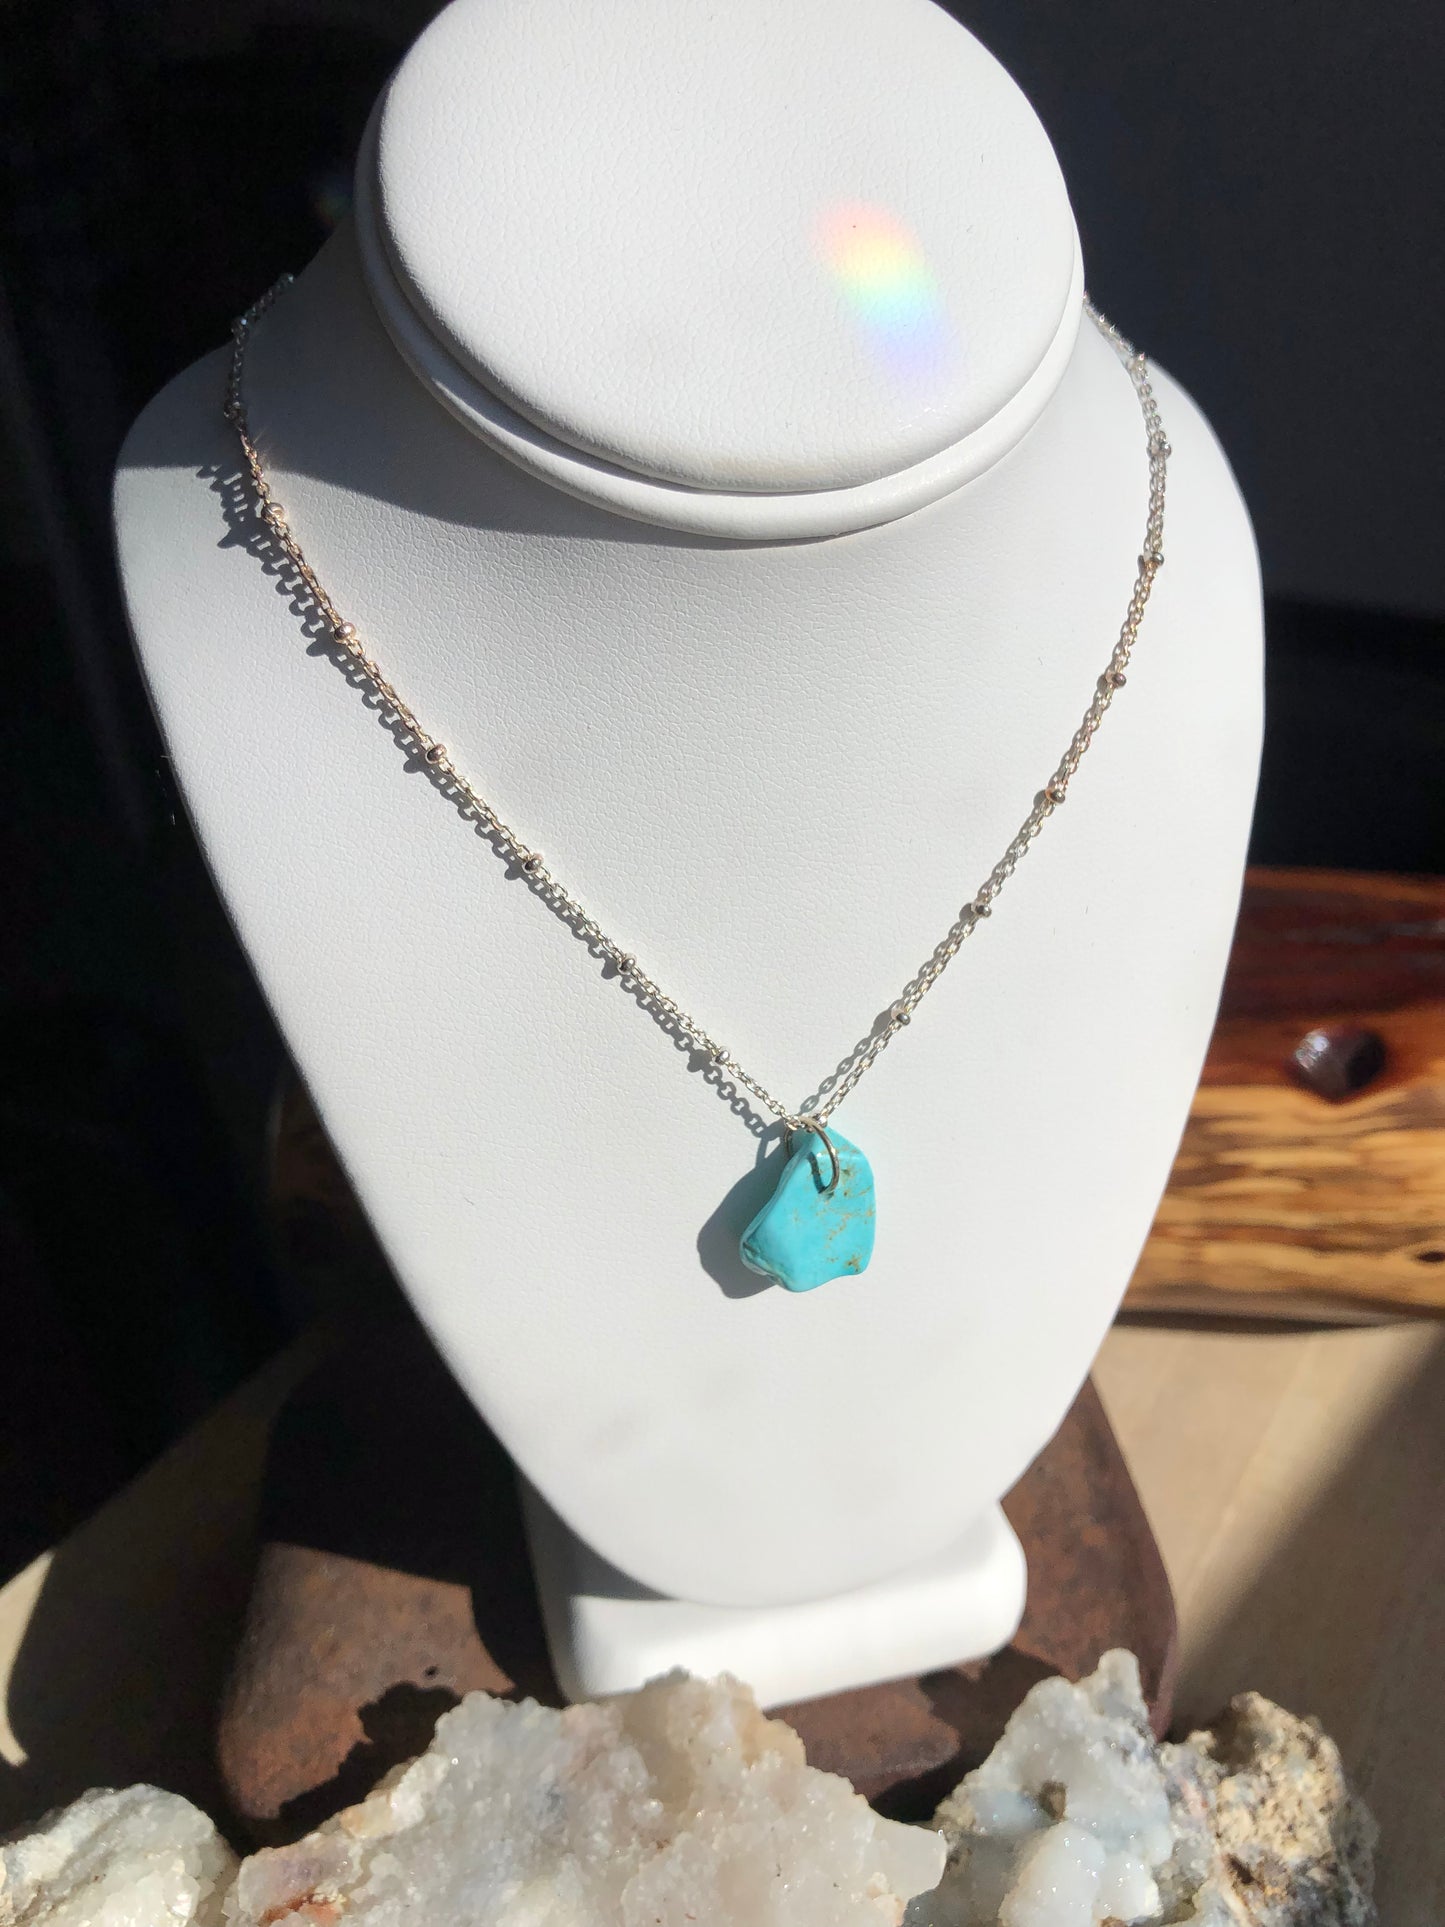 Turquoise Nugget Pendant Necklace - Silver Fox Mine